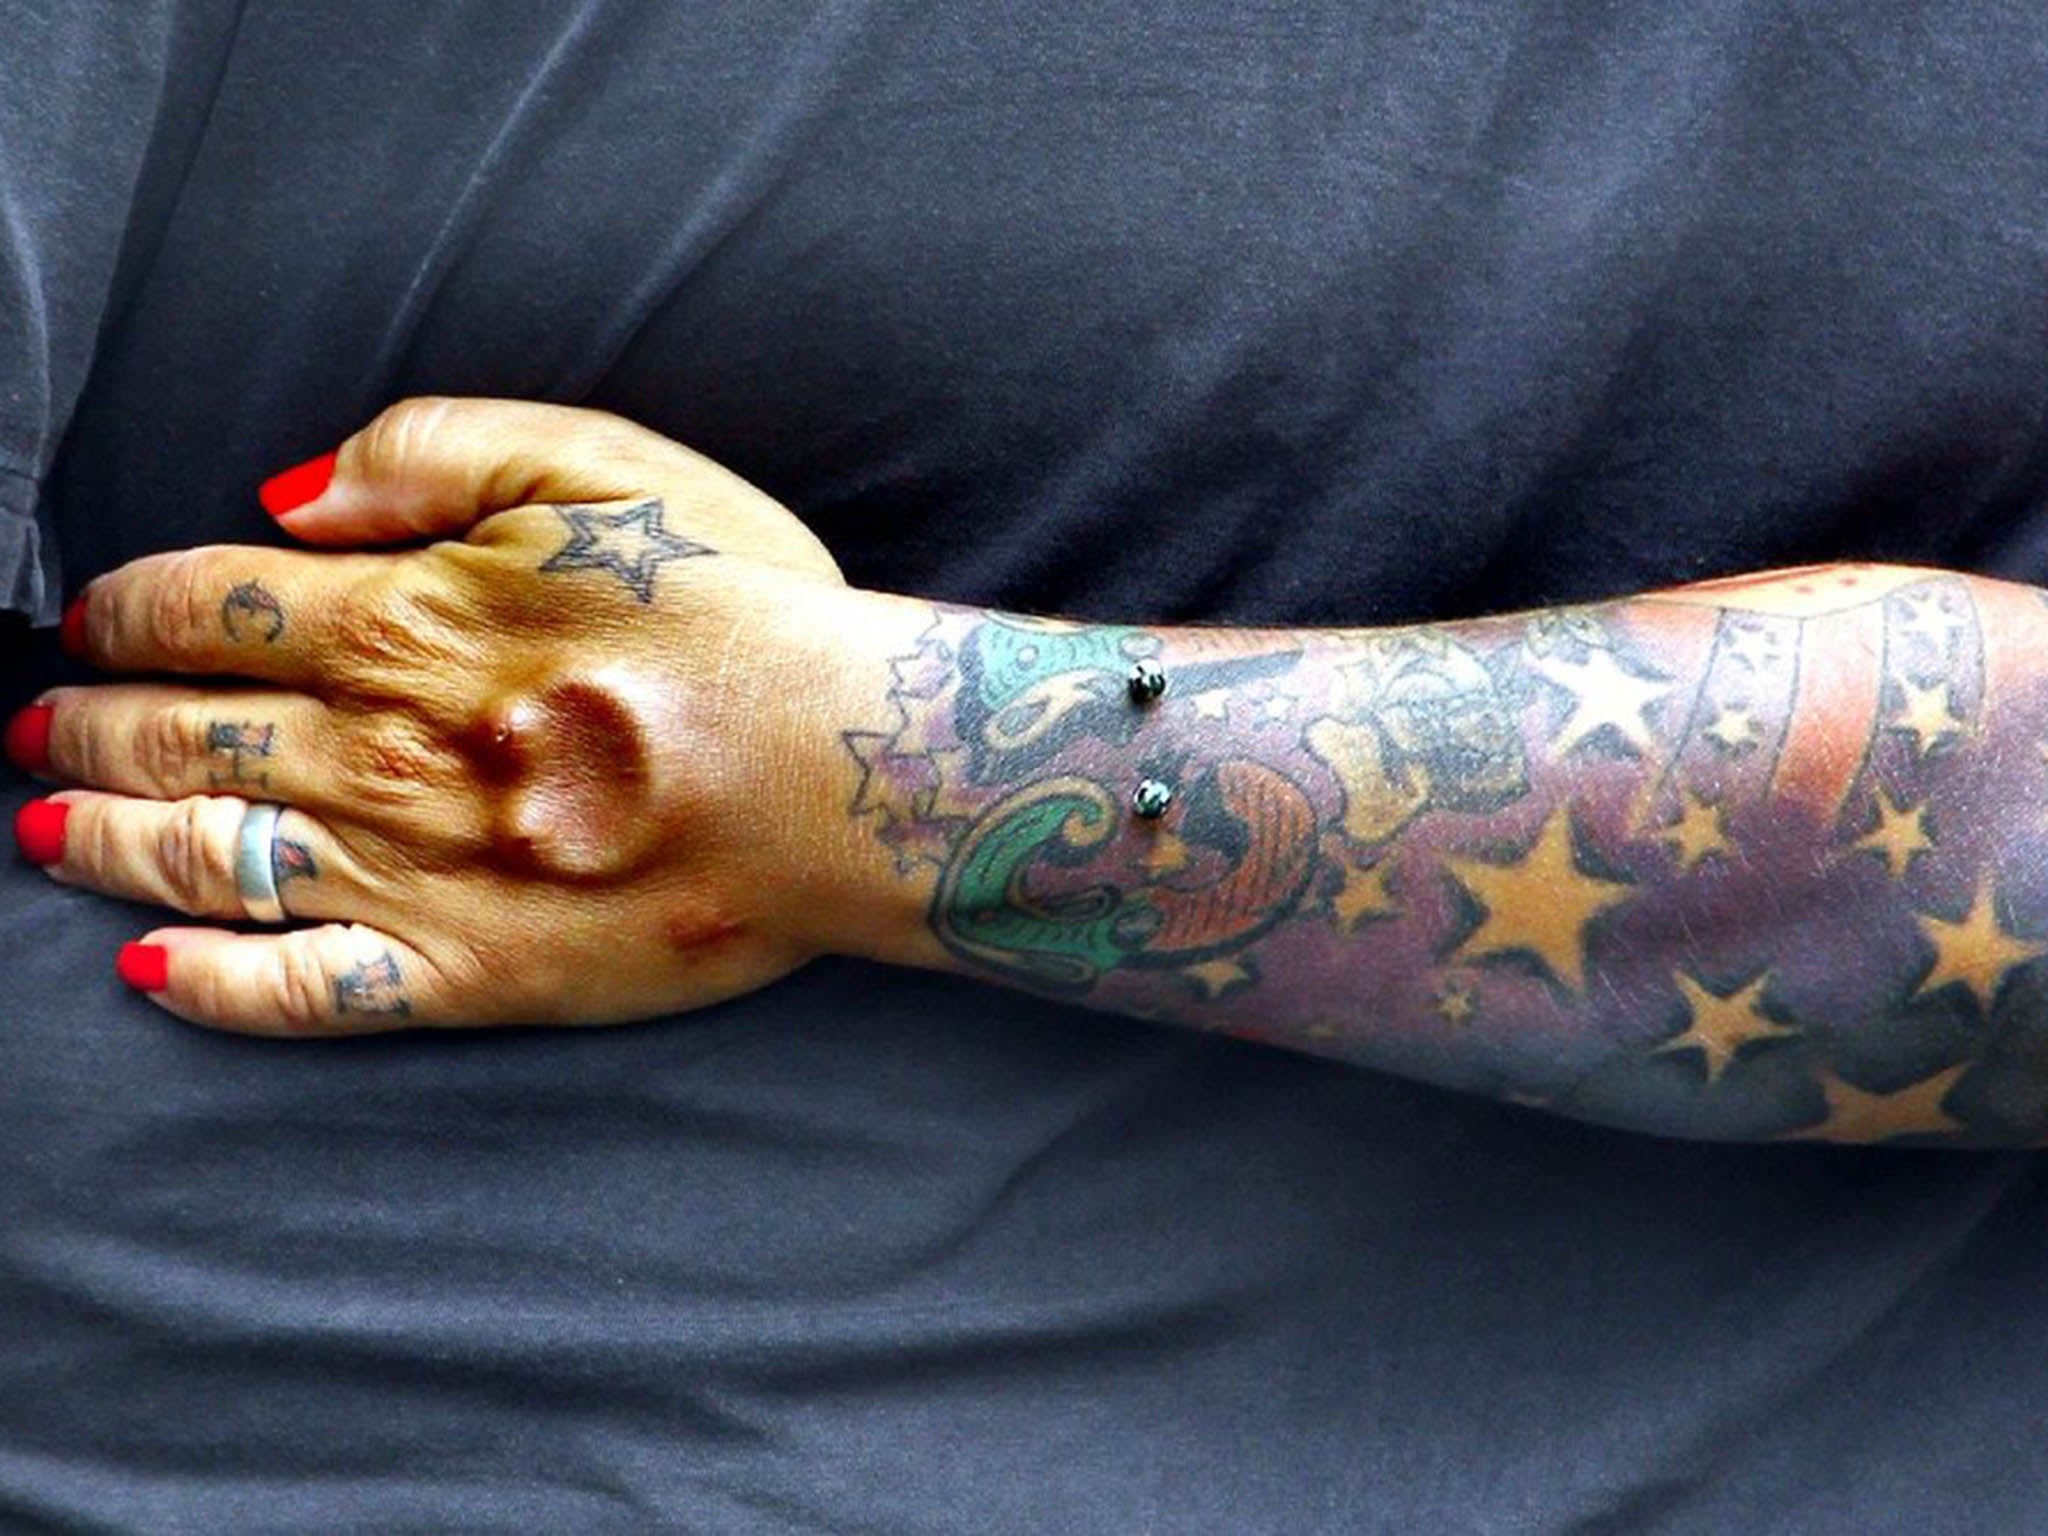 Is extreme body modification even legal? | The Independent | The Independent